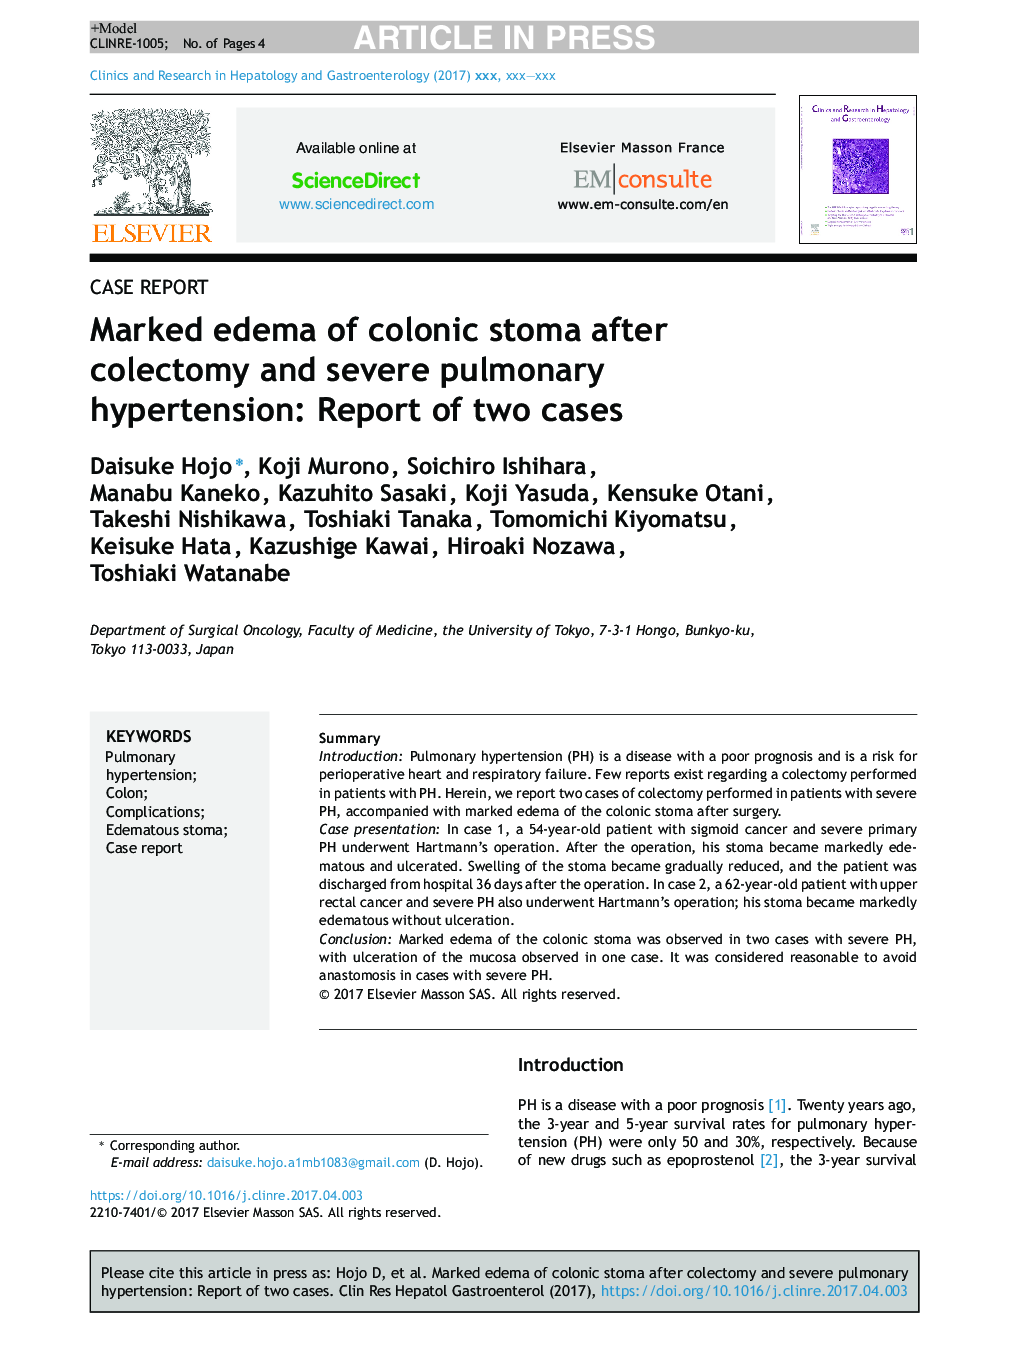 Marked edema of colonic stoma after colectomy and severe pulmonary hypertension: Report of two cases